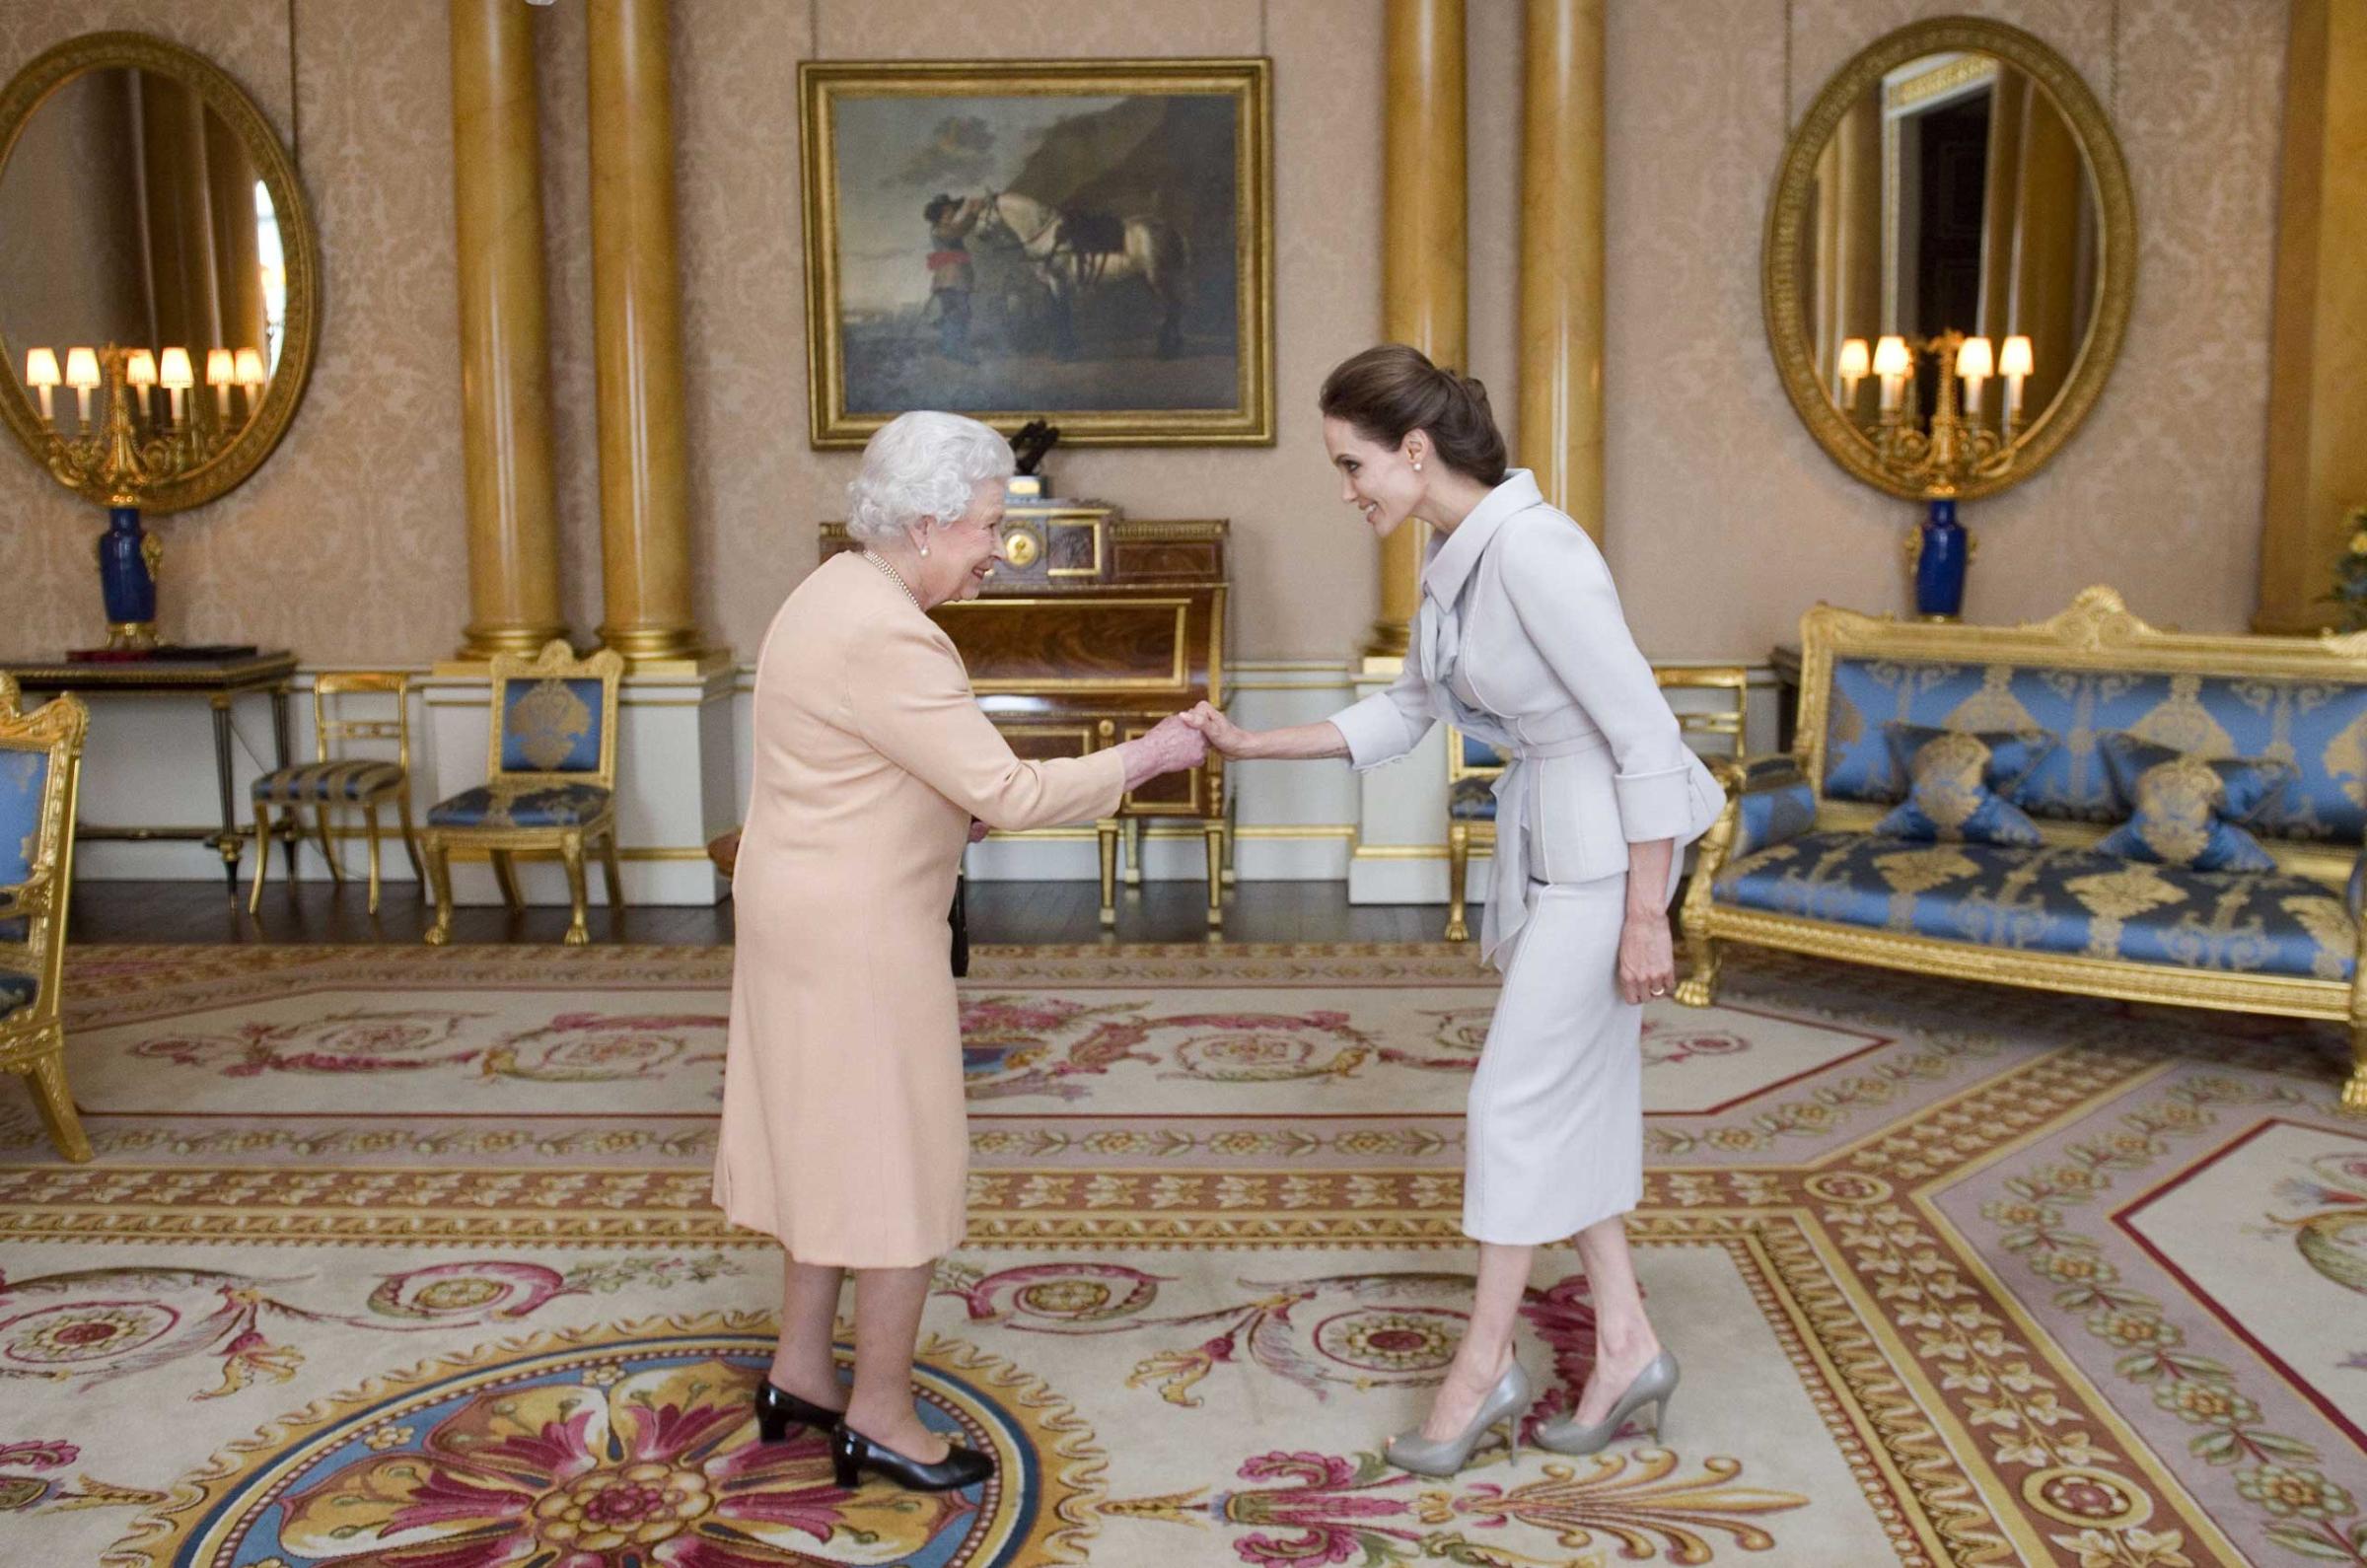 Angelina Jolie, actor and humanitarian, is presented with honorary damehood by Britain’s Queen Elizabeth II in London on Oct. 10 for her services to U.K. foreign policy and her campaign to end sexual violence in war zones.